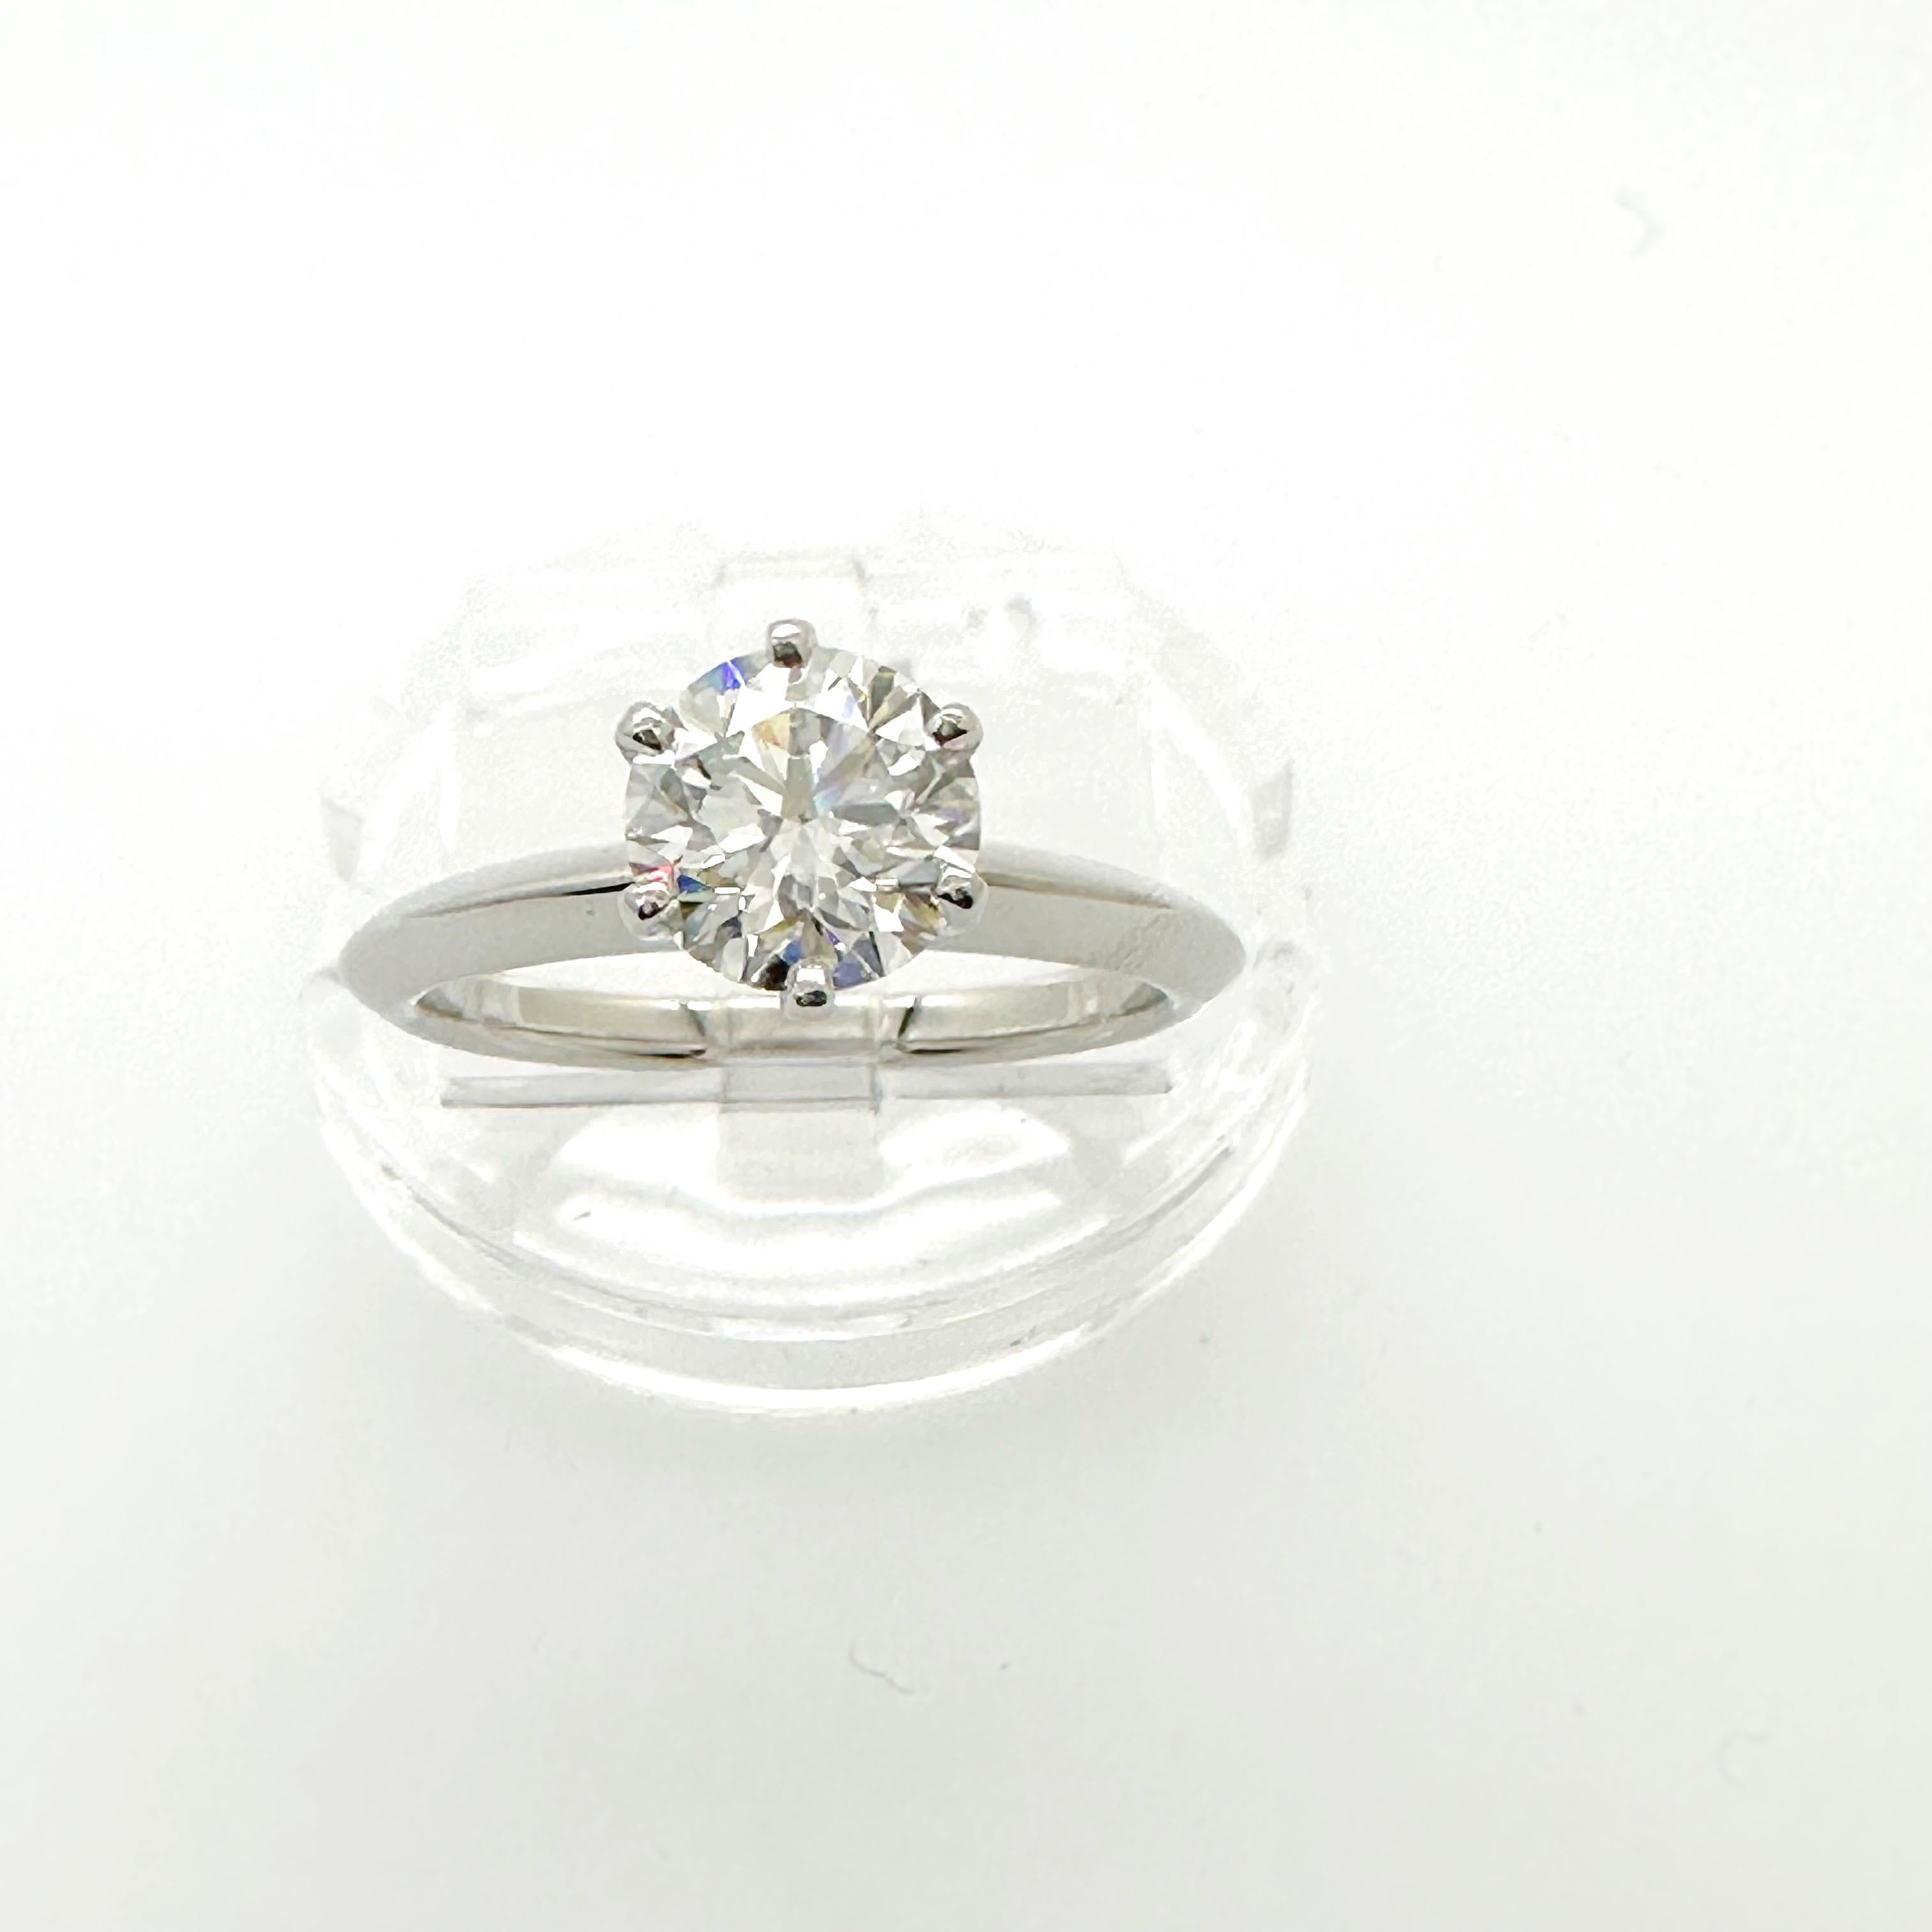 Tiffany & Co. Round Diamond 1.12 CTS G VS1 Solitaire Engagement Ring COA Box For Sale 9